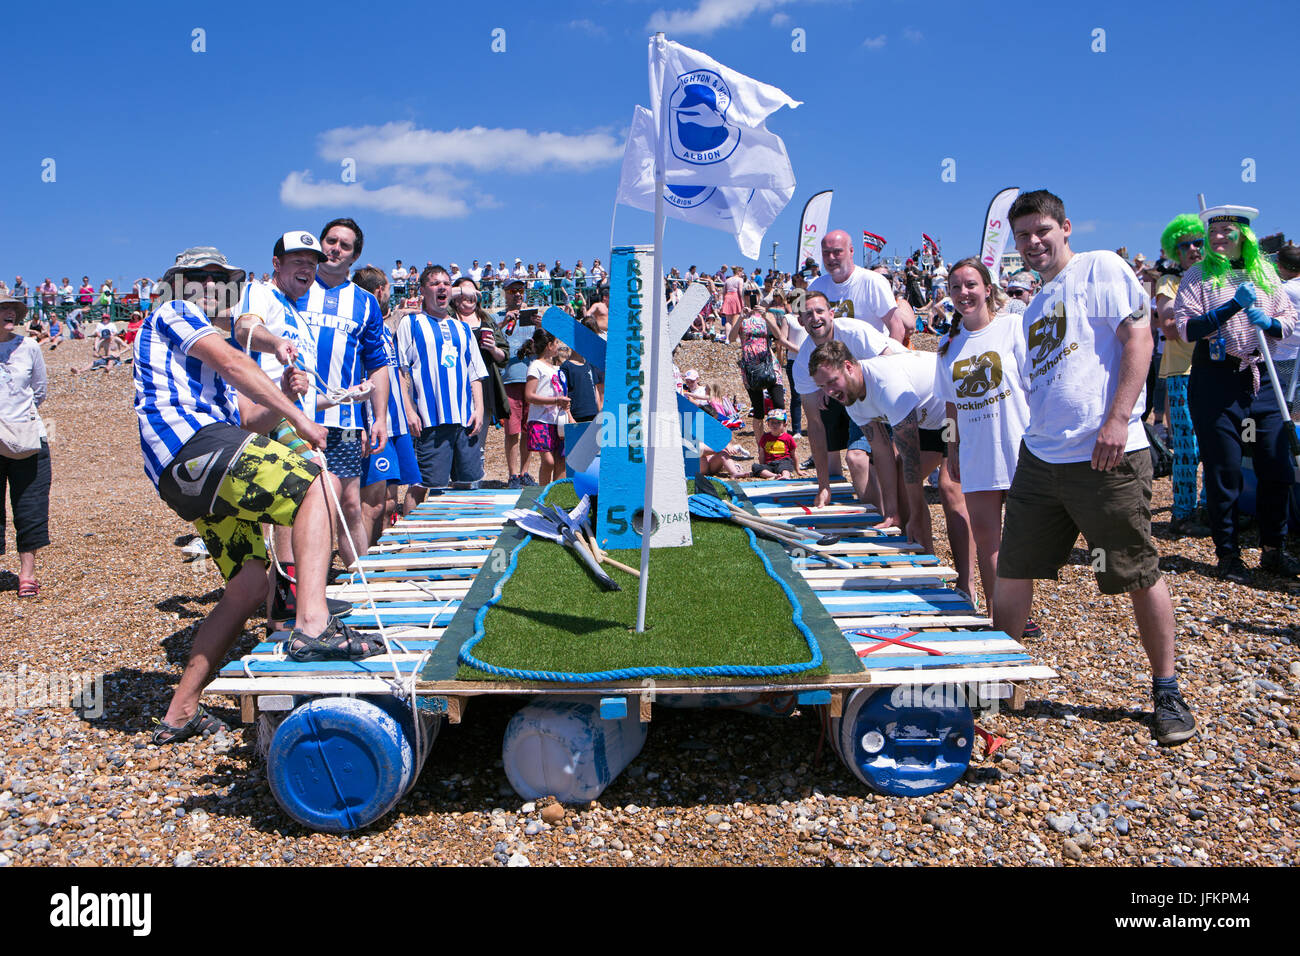 Brighton, UK. 2nd July, 2017. The highlight event of the Paddle Round The Pier Festival 2017. The “Paddle Something Unusual” is the perfect opportunity for competitors to  exercise their creativity and join in the Paddle. City of Brighton & Hove Beach, East Sussex, UK. 2nd July 2017. Credit: David Smith/Alamy Live News Stock Photo